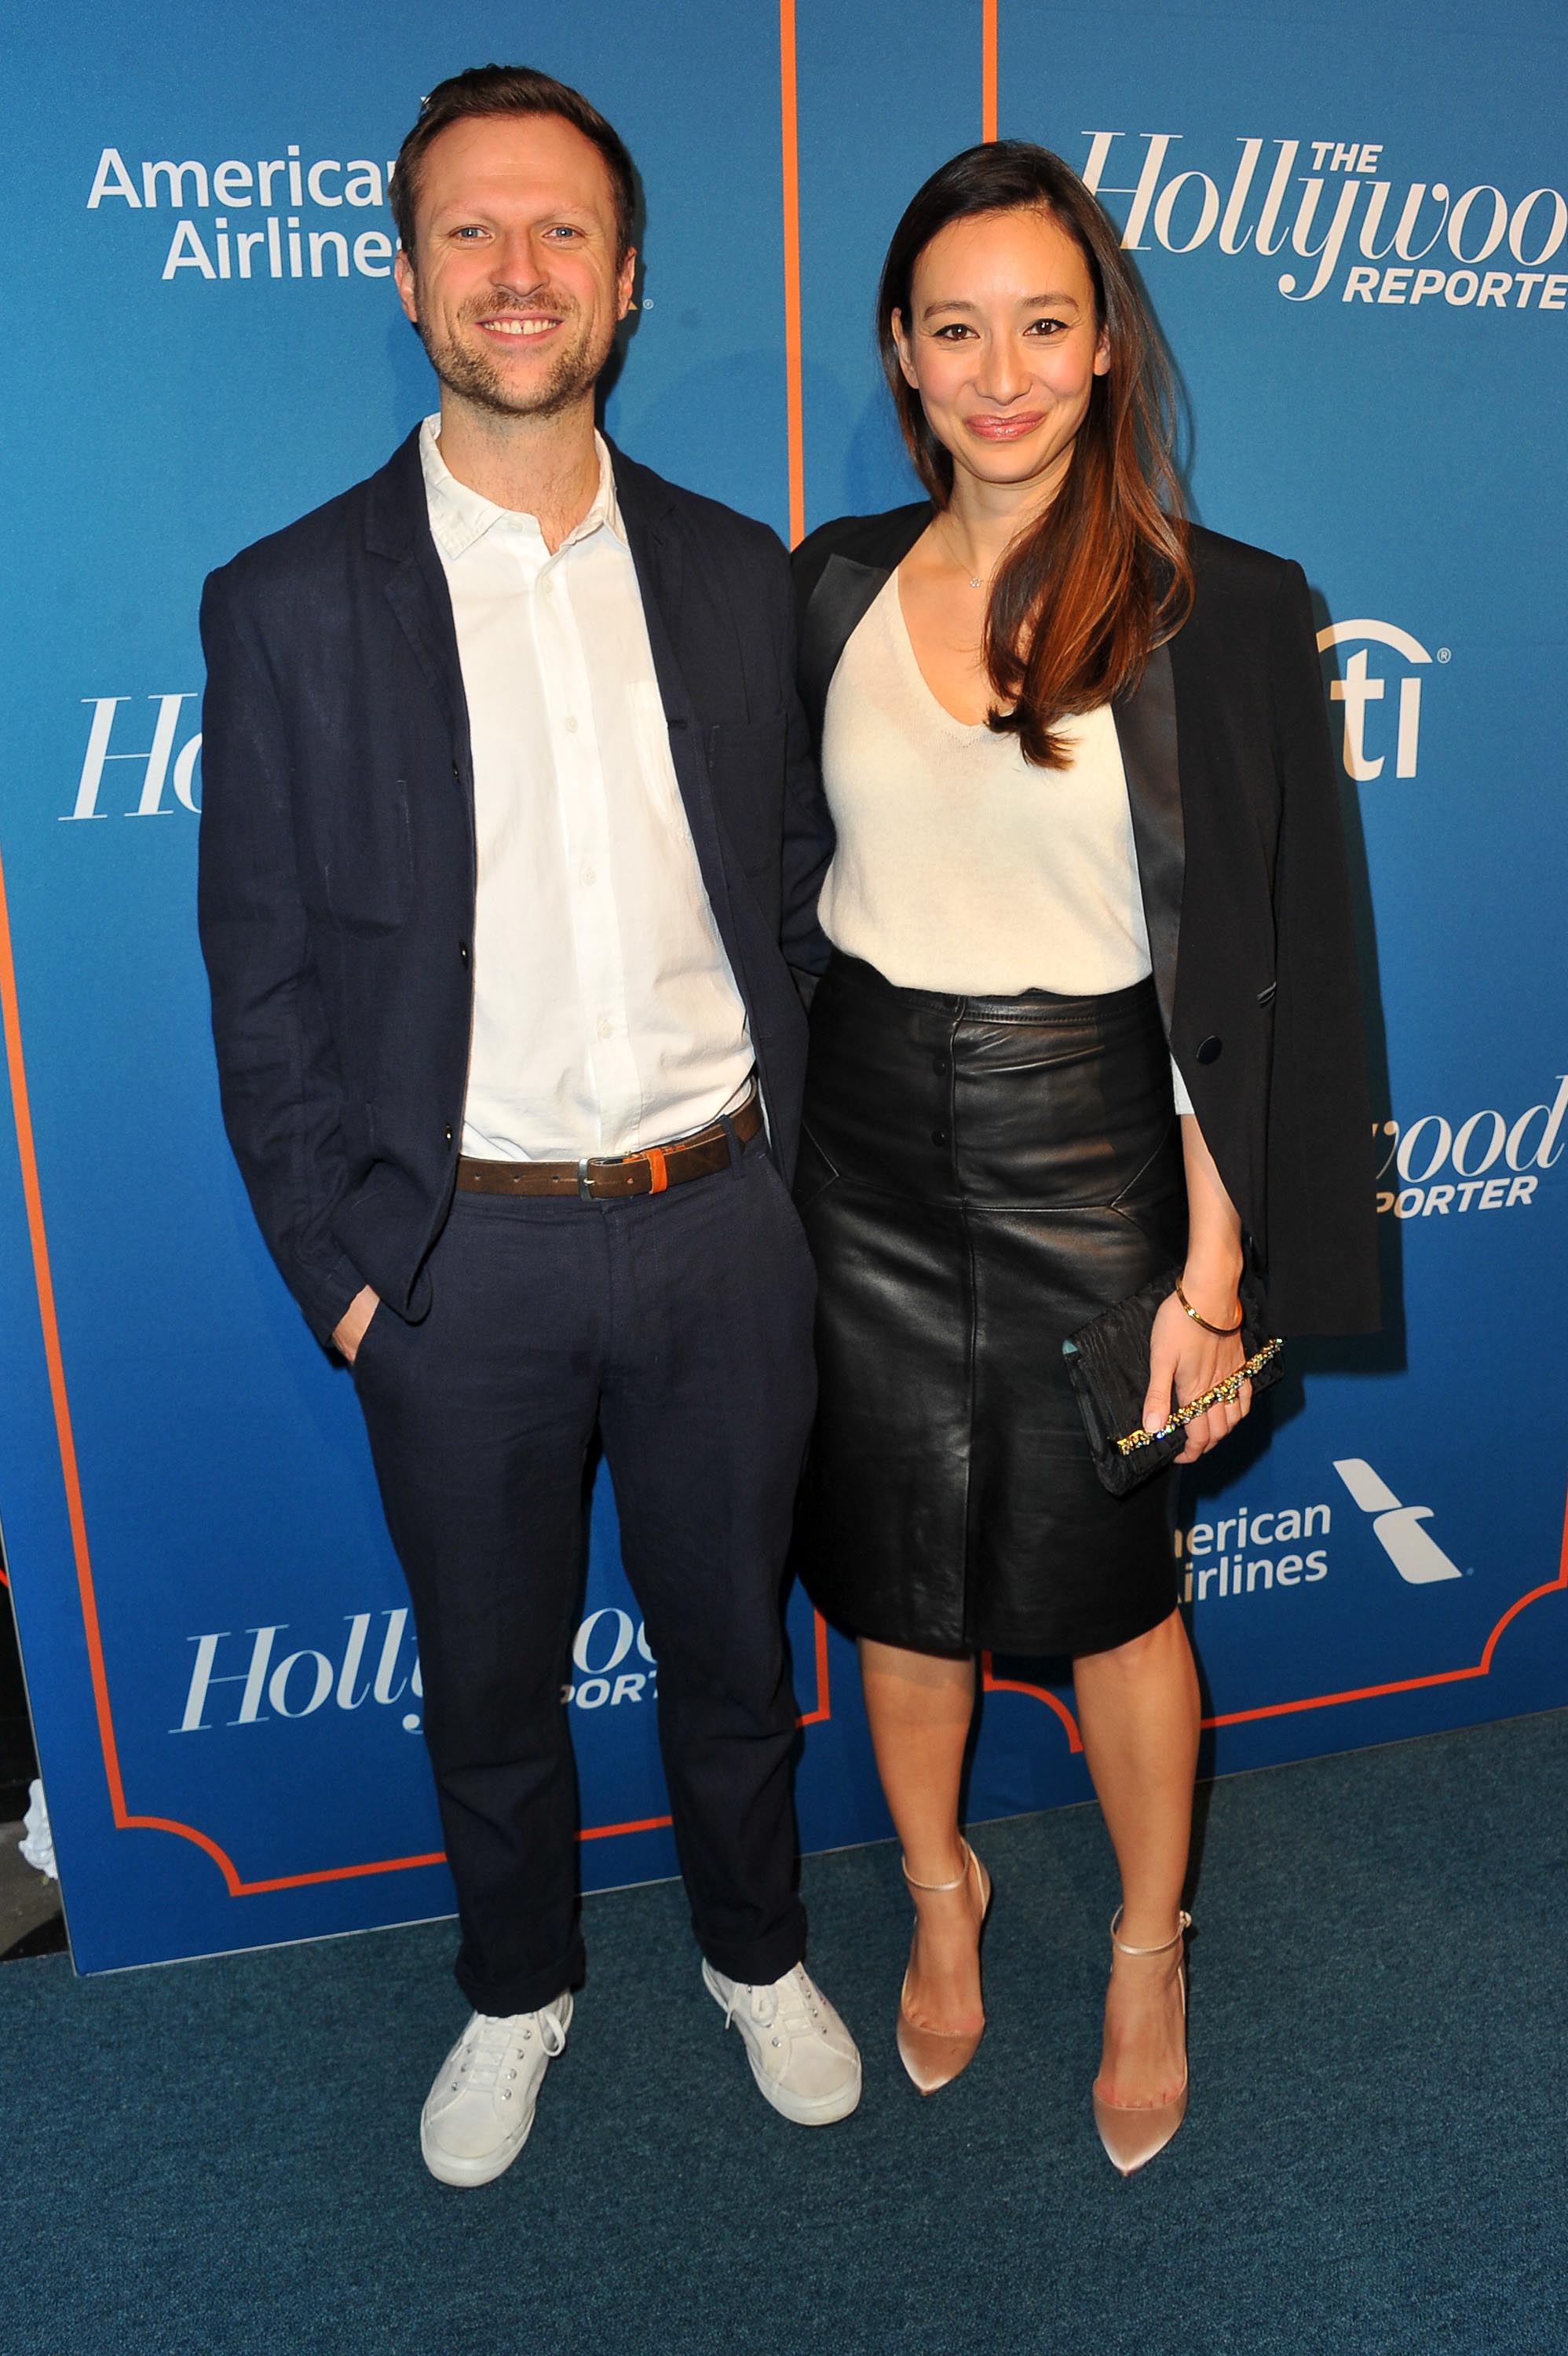 Joanna Natasegara attends The Hollywood Reporter 5th Annual Nominees Night